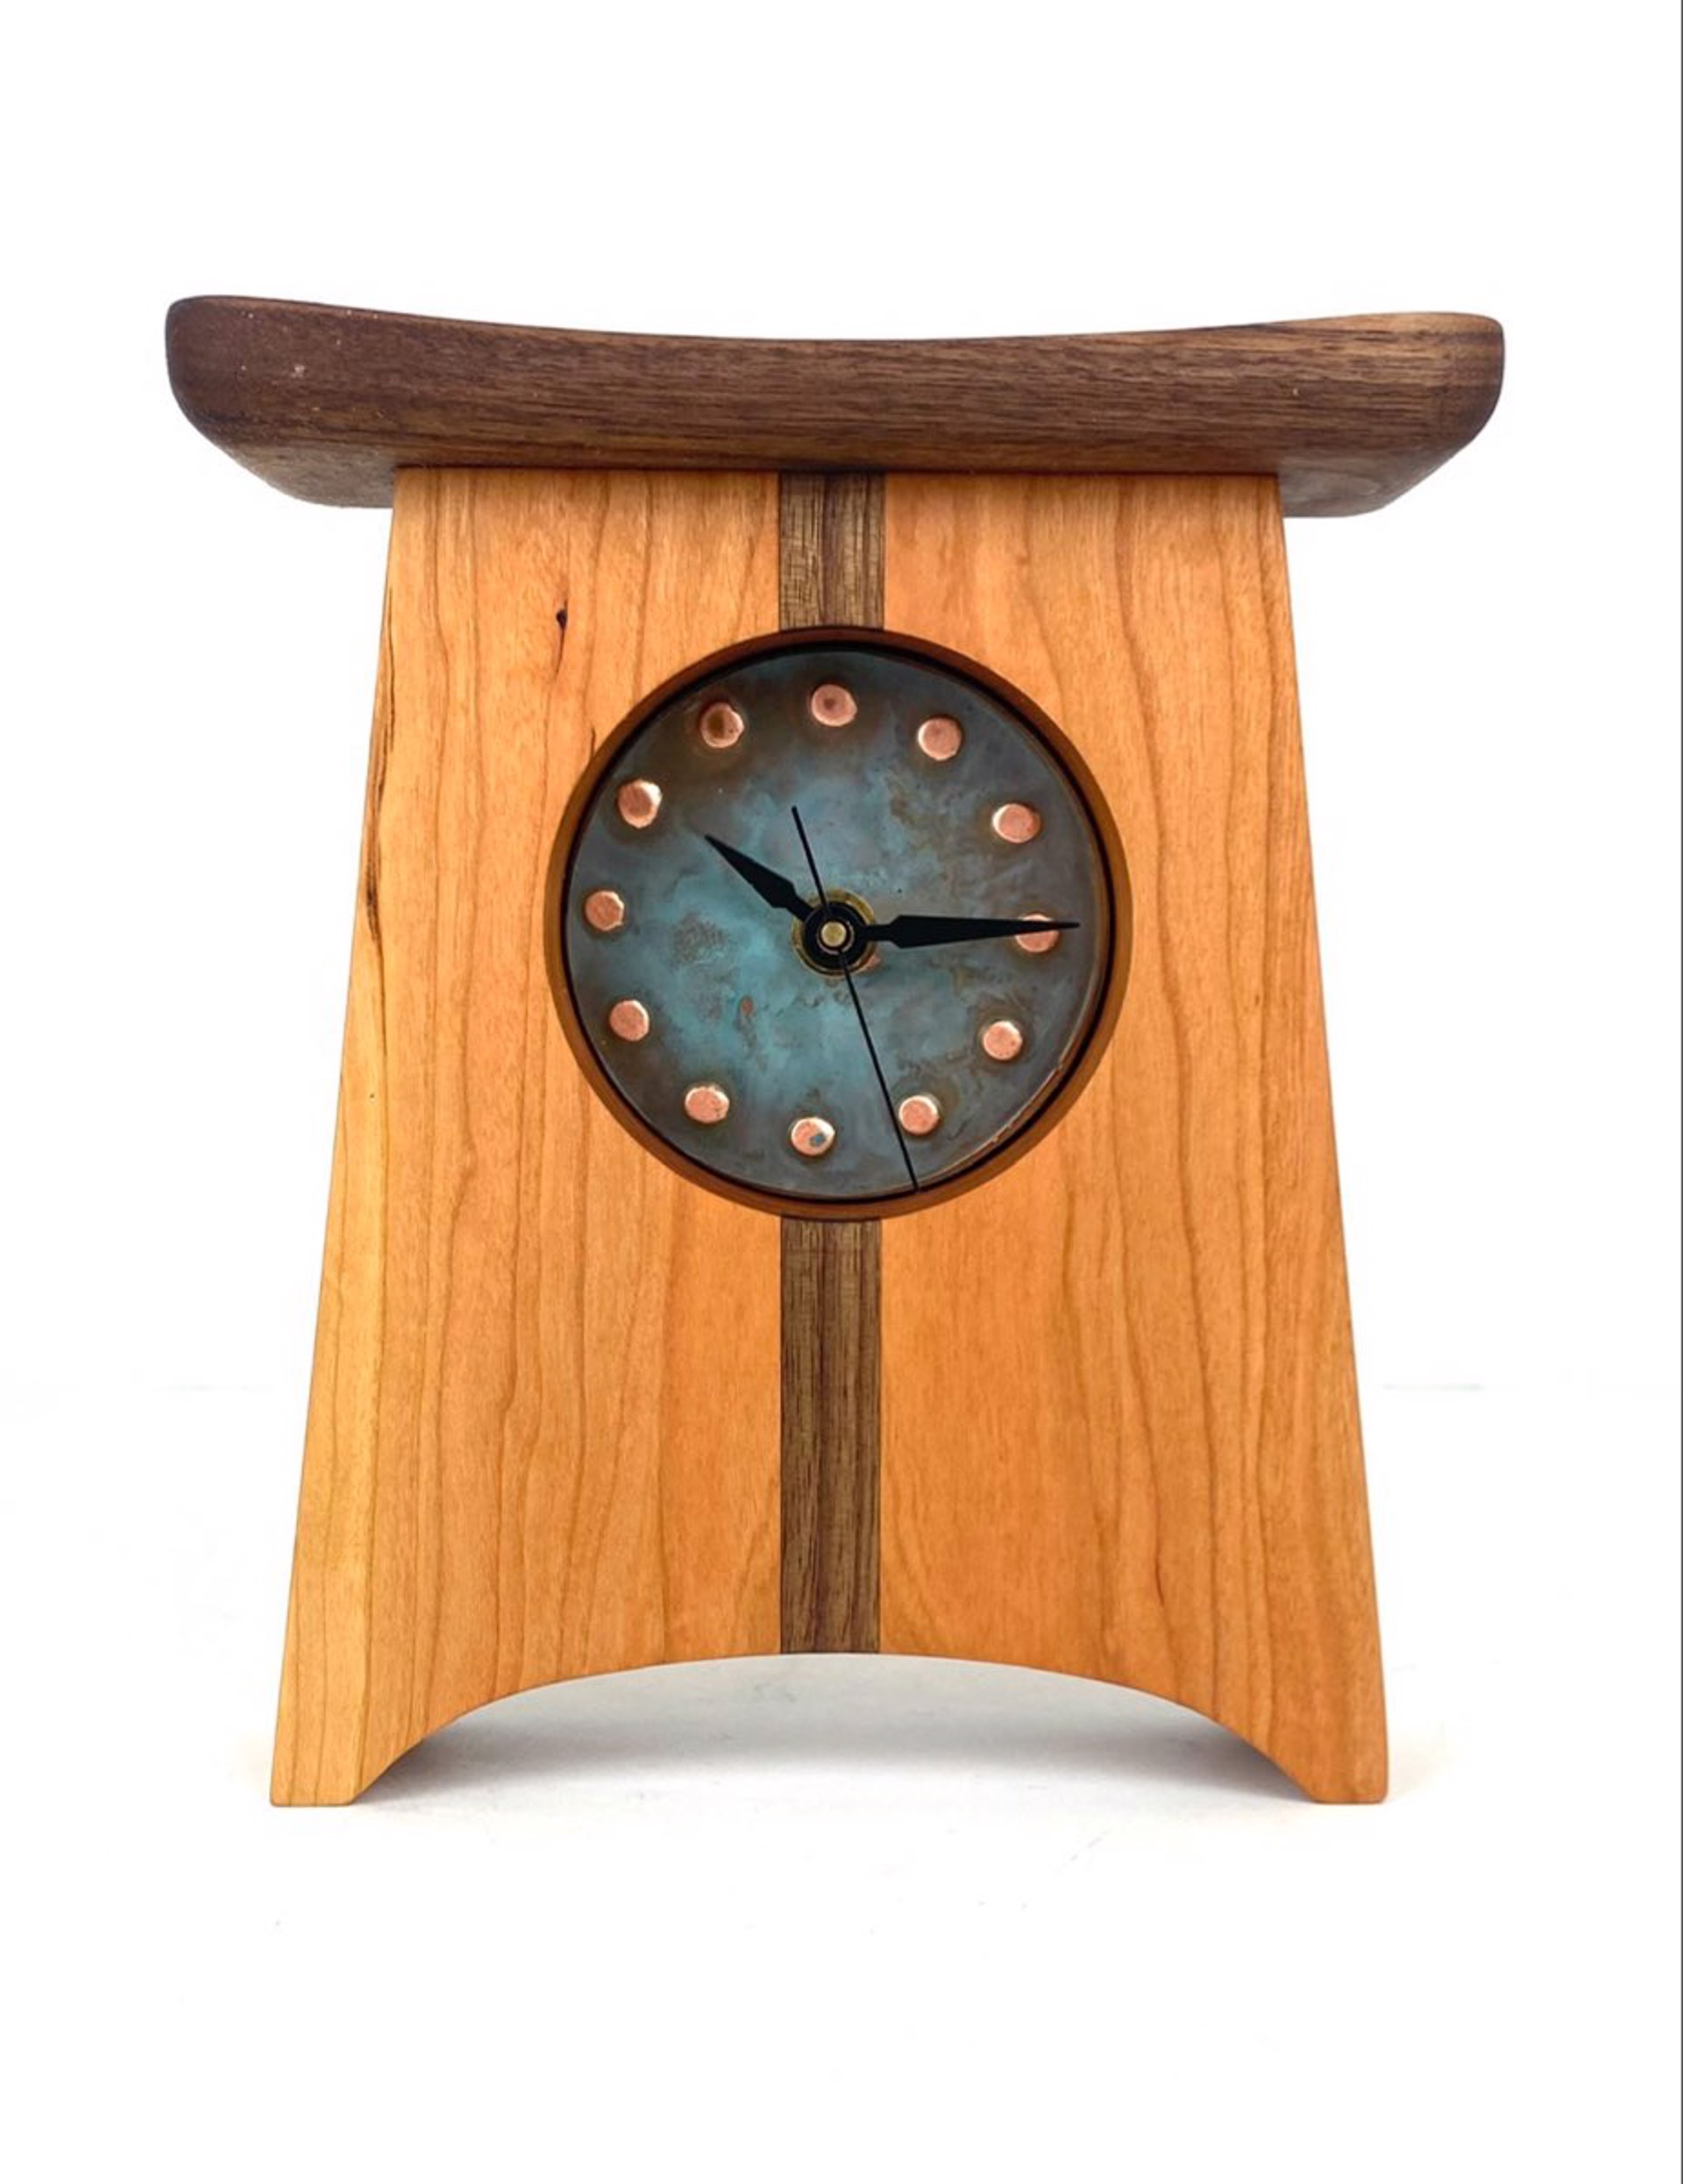 East of Appalachia Clock with Green Patina by Sabbath Day Woods